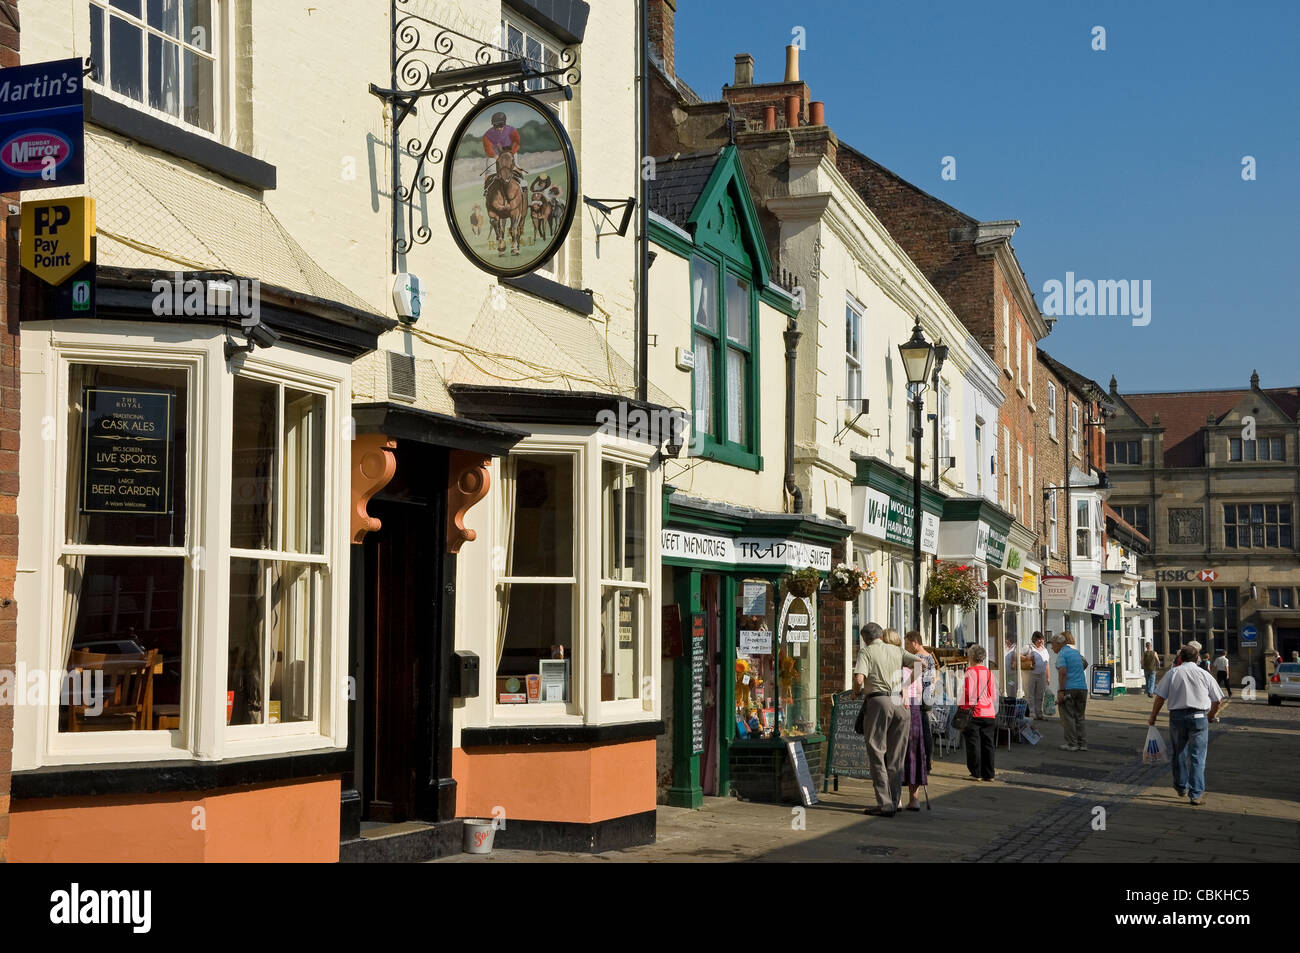 The Royal pub and shops stores Market Place Thirsk North Yorkshire England UK United Kingdom GB Great Britain Stock Photo